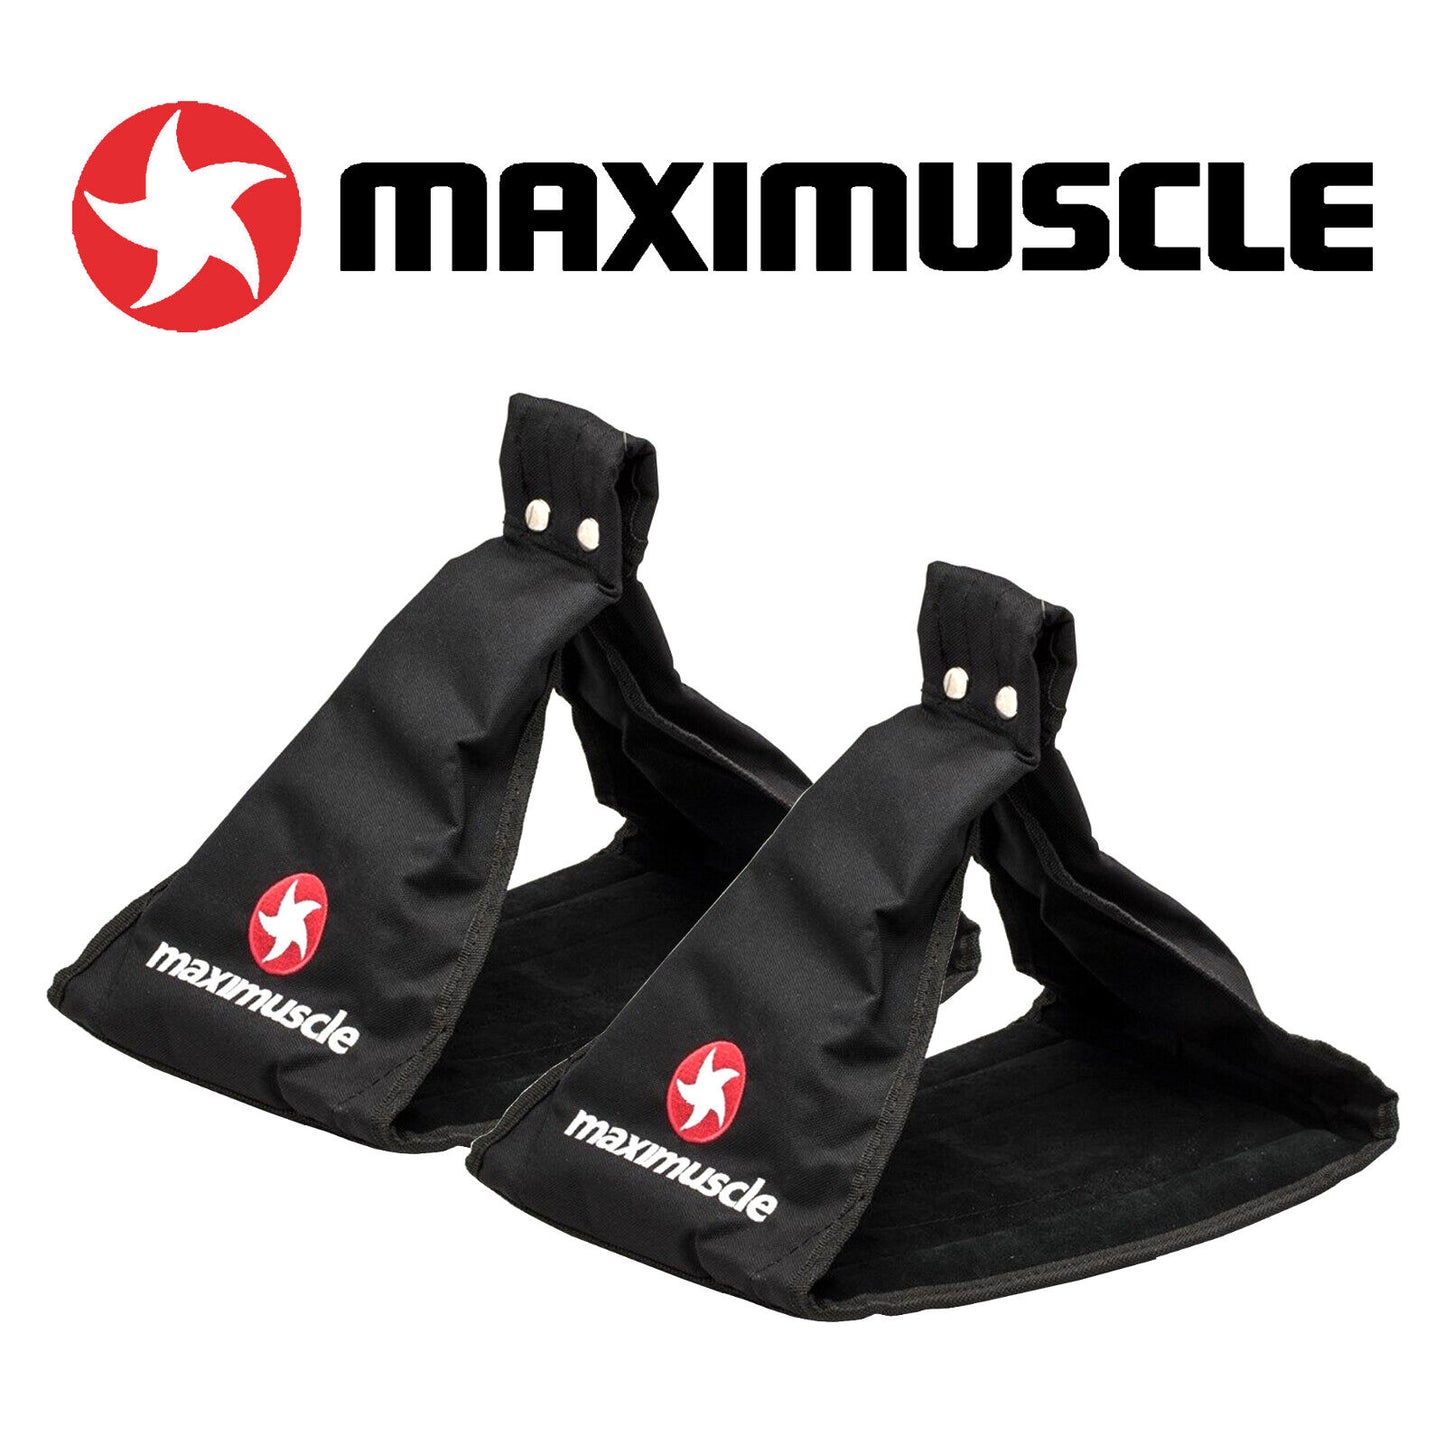 Maximuscle MaxiNutrition Ab Workout Sling - Pair